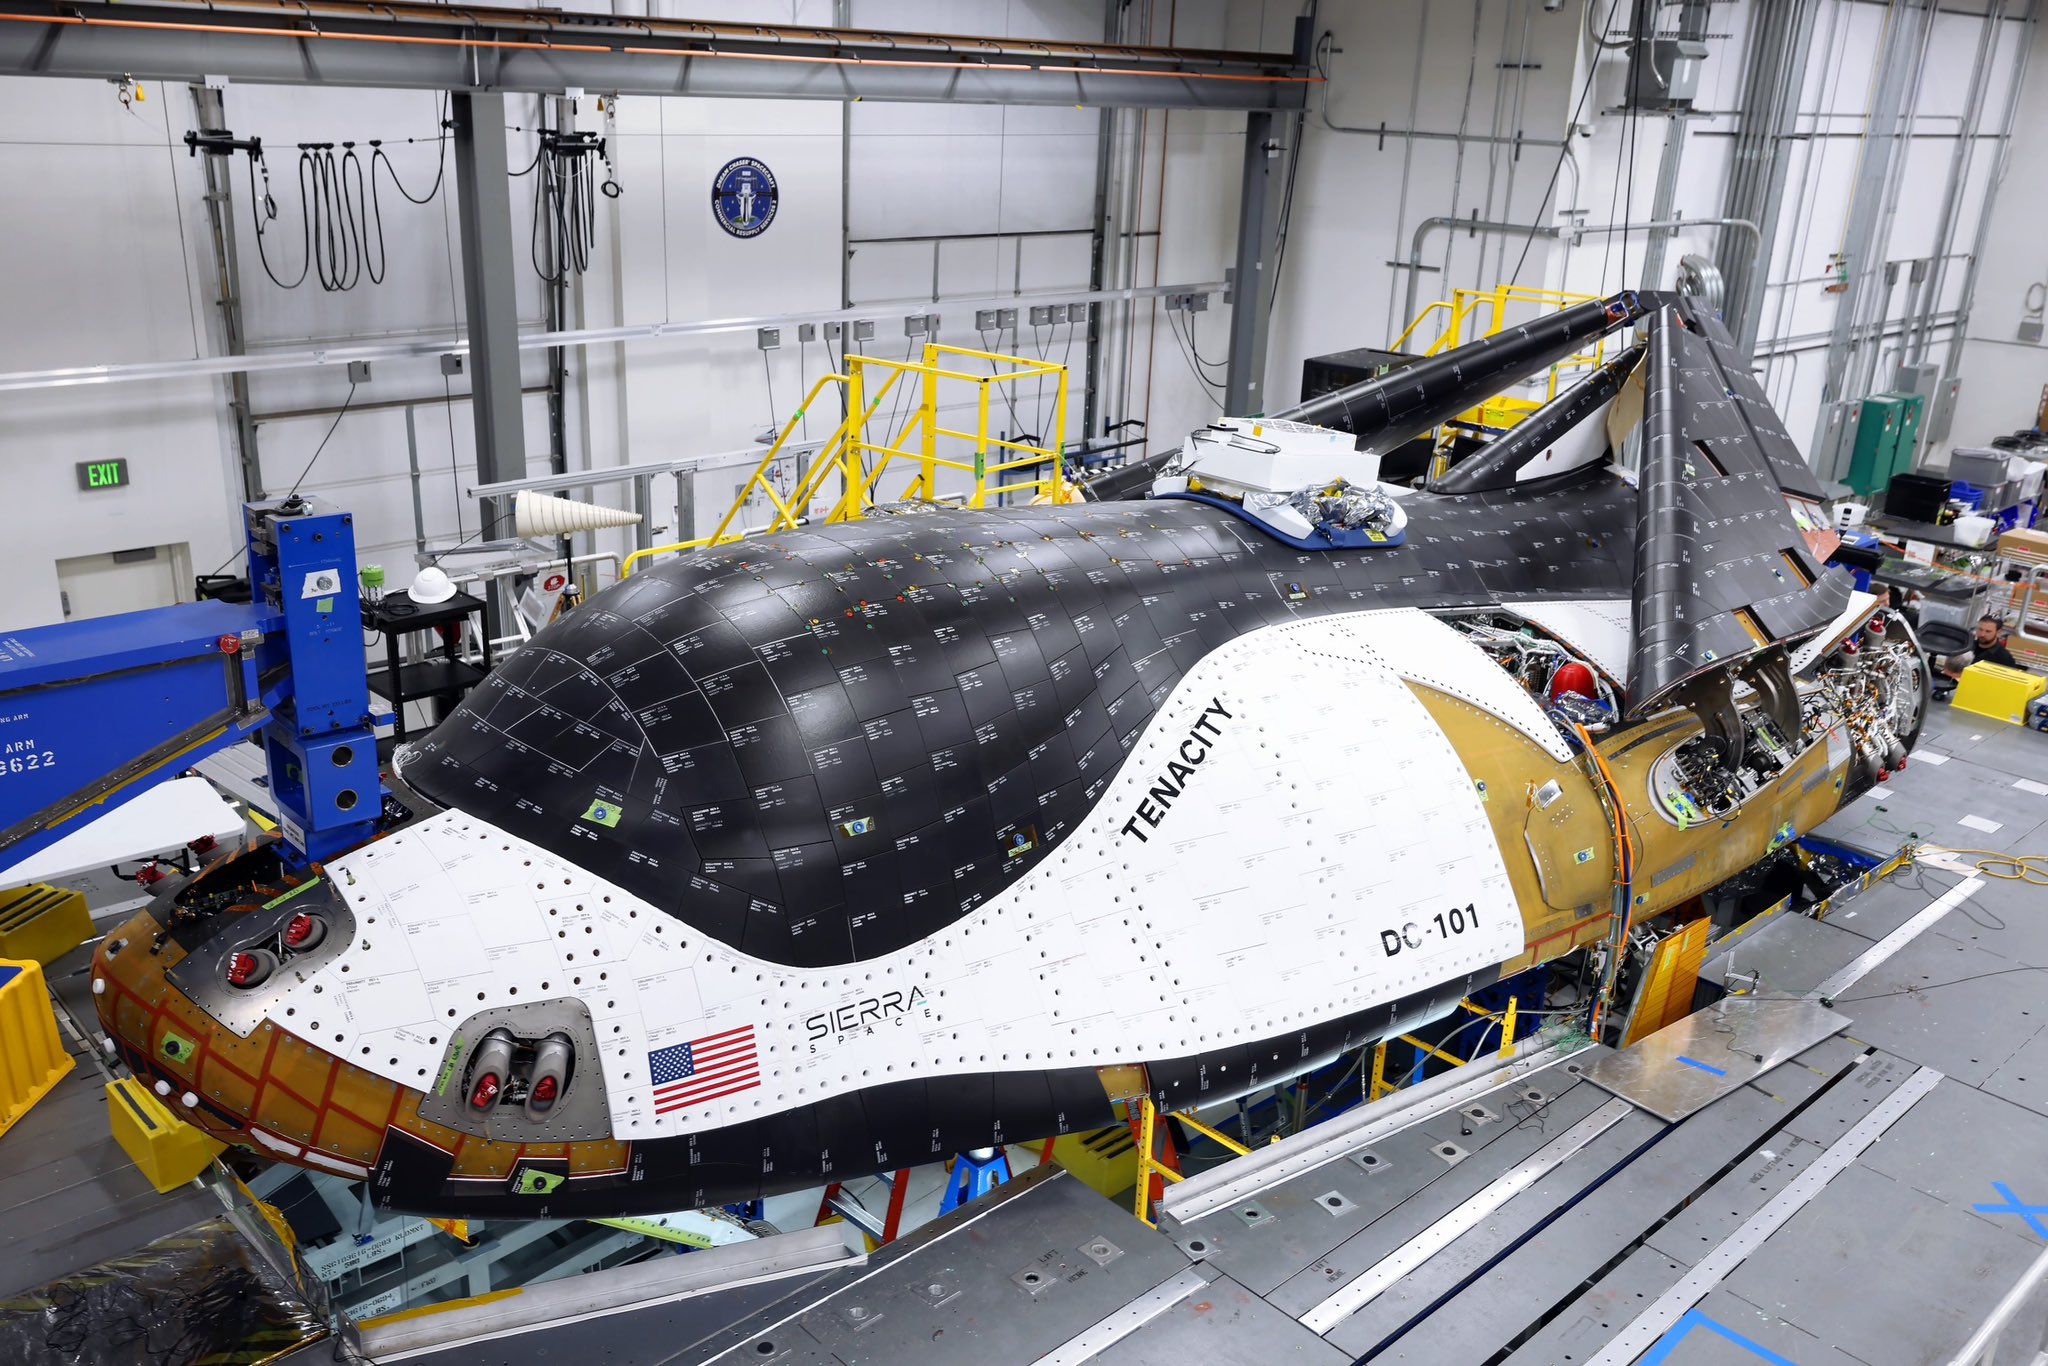 Sierra Space completes construction of the first Dream Chaser spaceplane